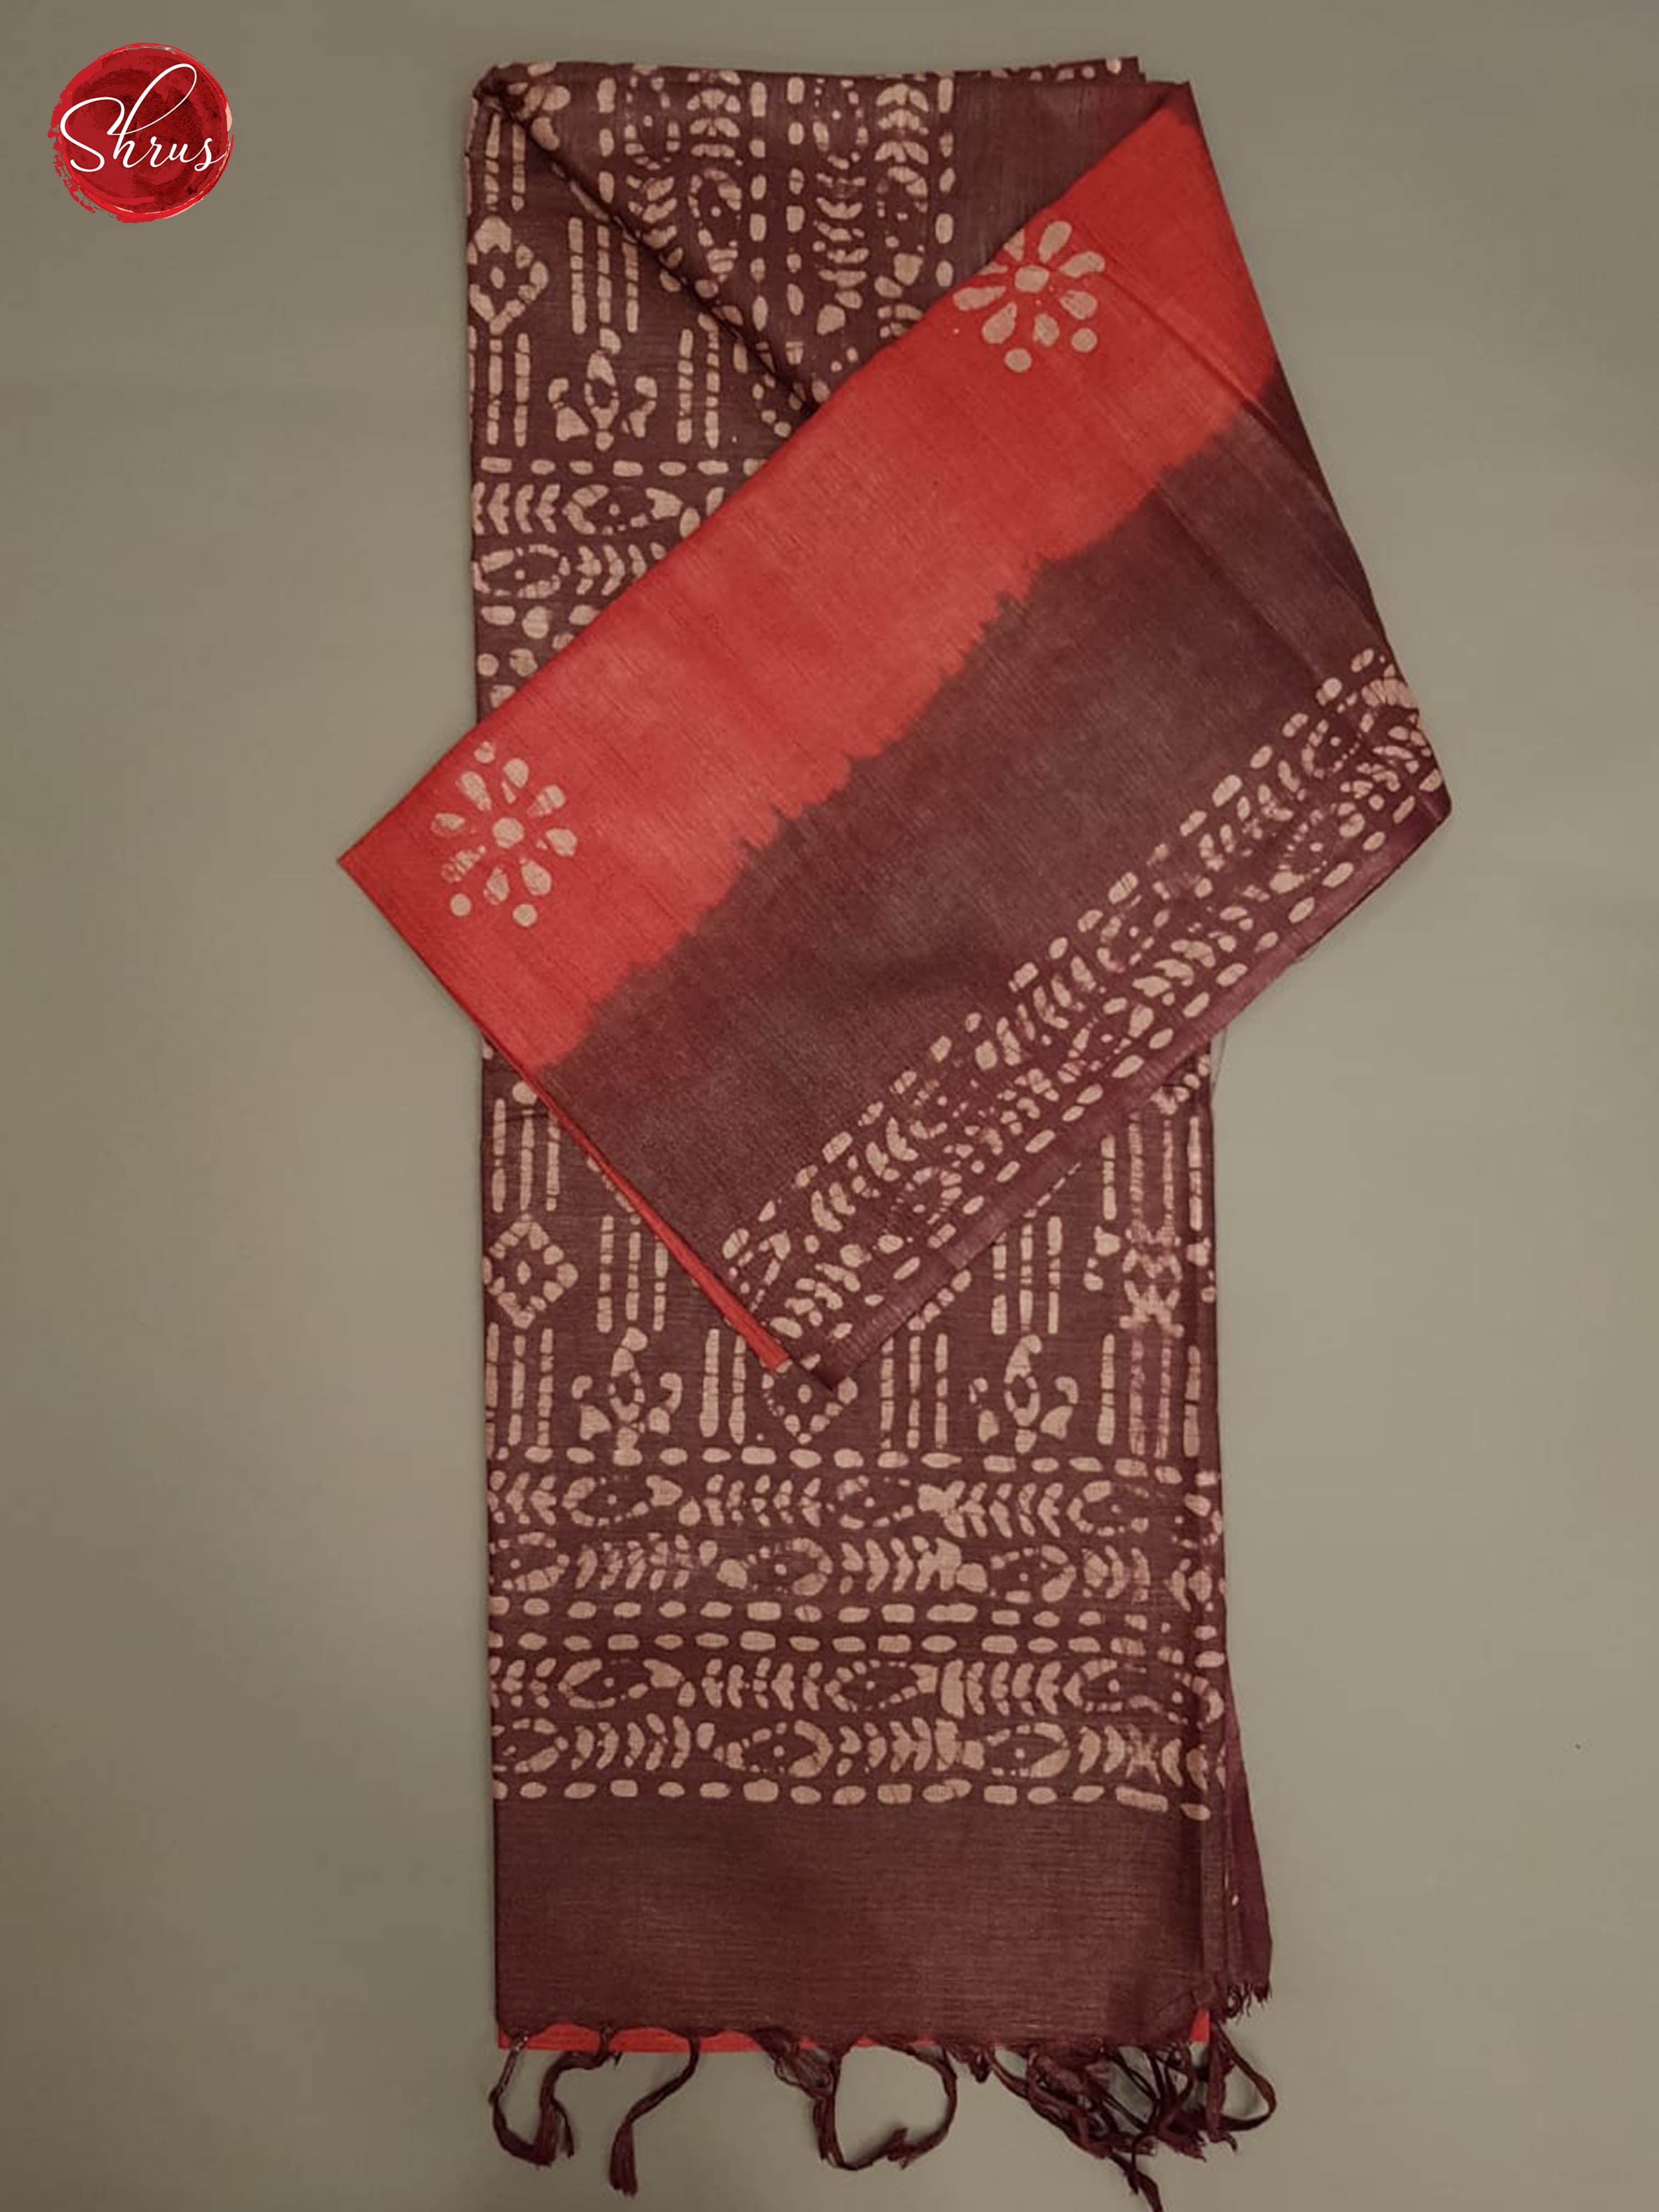 Red & Brown - Bhatik with printed Border - Shop on ShrusEternity.com